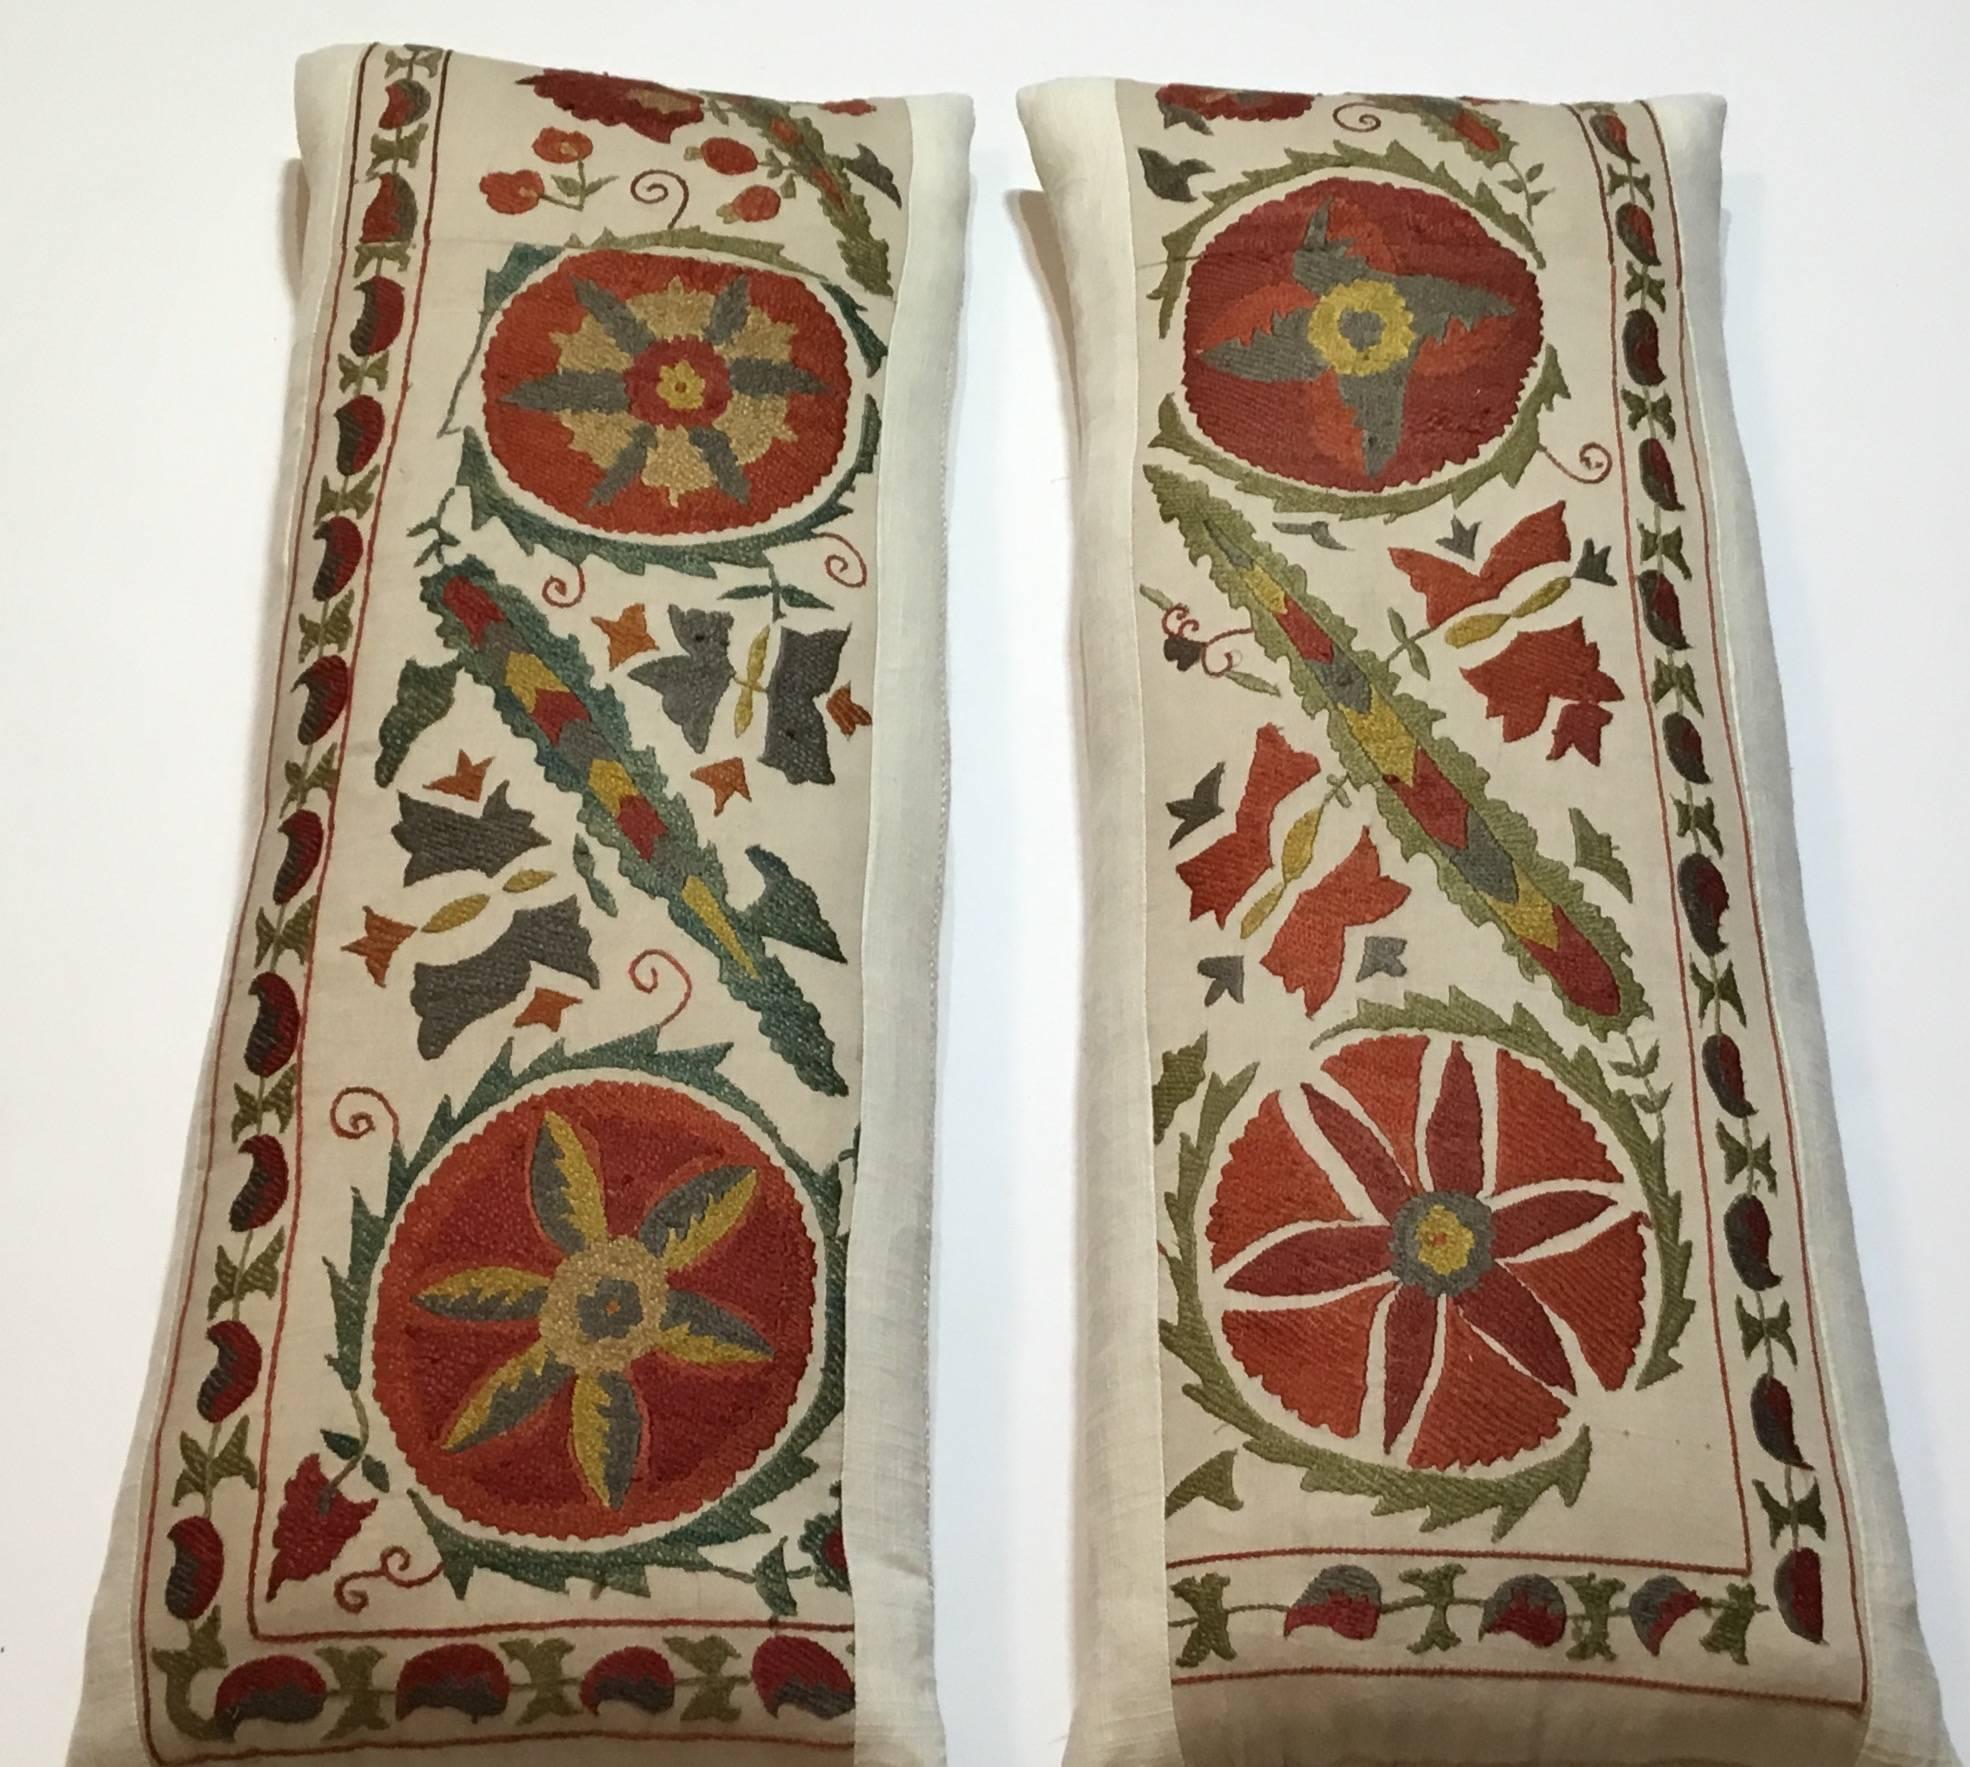 Beautiful pair of pillows made of hand embroidery silk of vine and flowers motifs, on a cream color background. Linen backing, frash down and feather
Inserts.